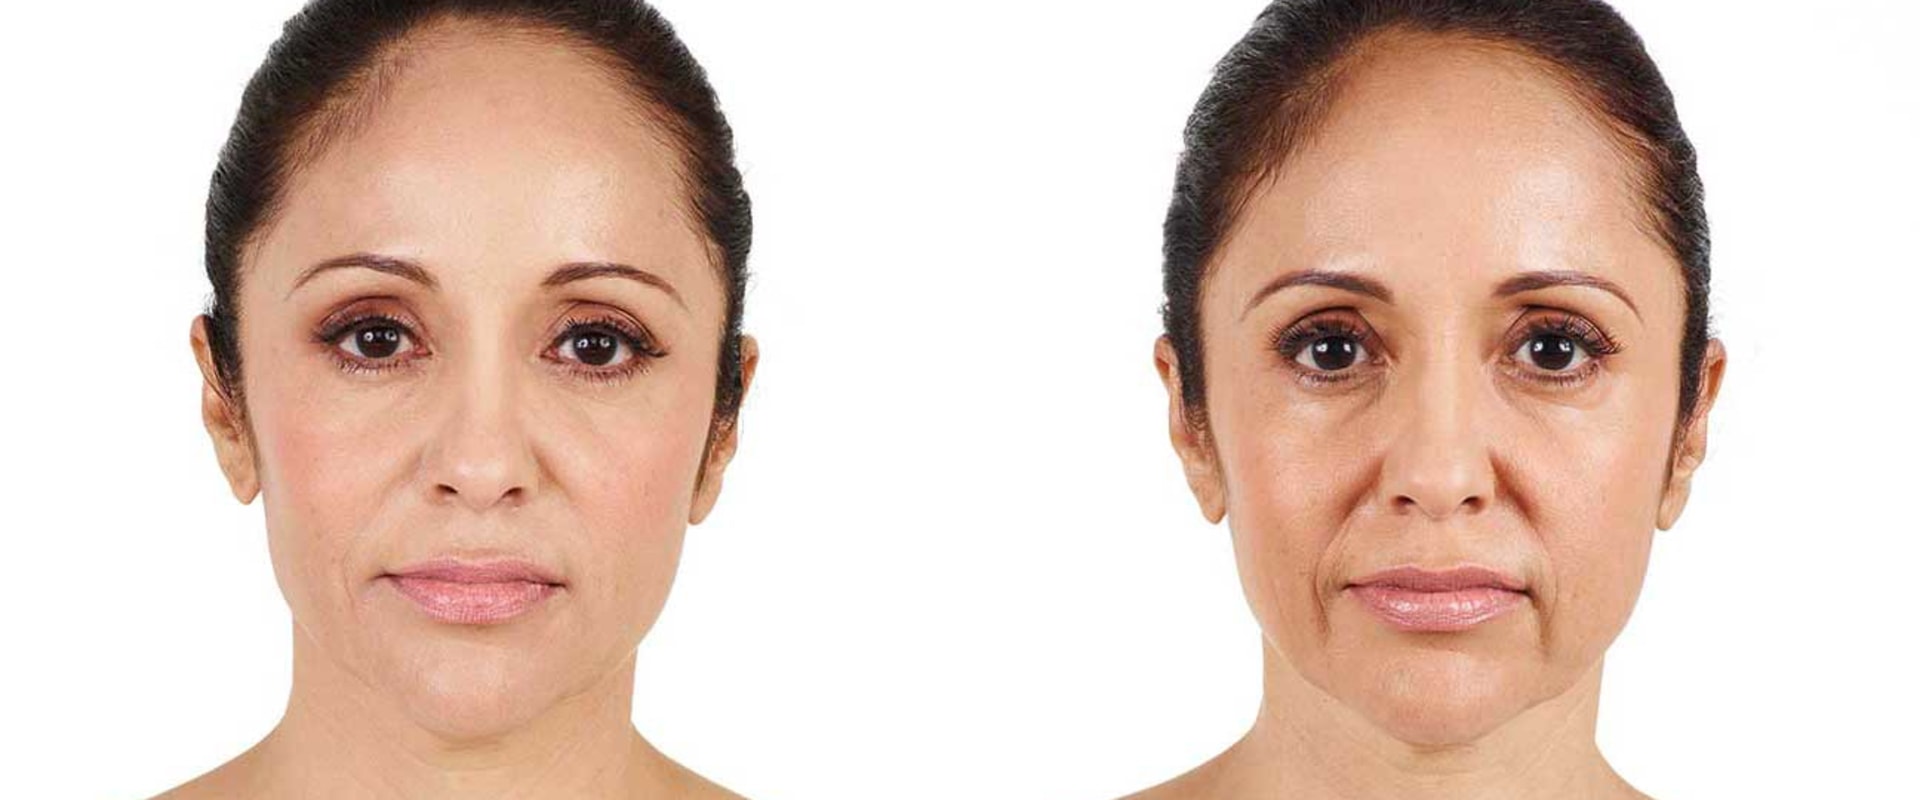 What Can Juvederm Do For Your Face?